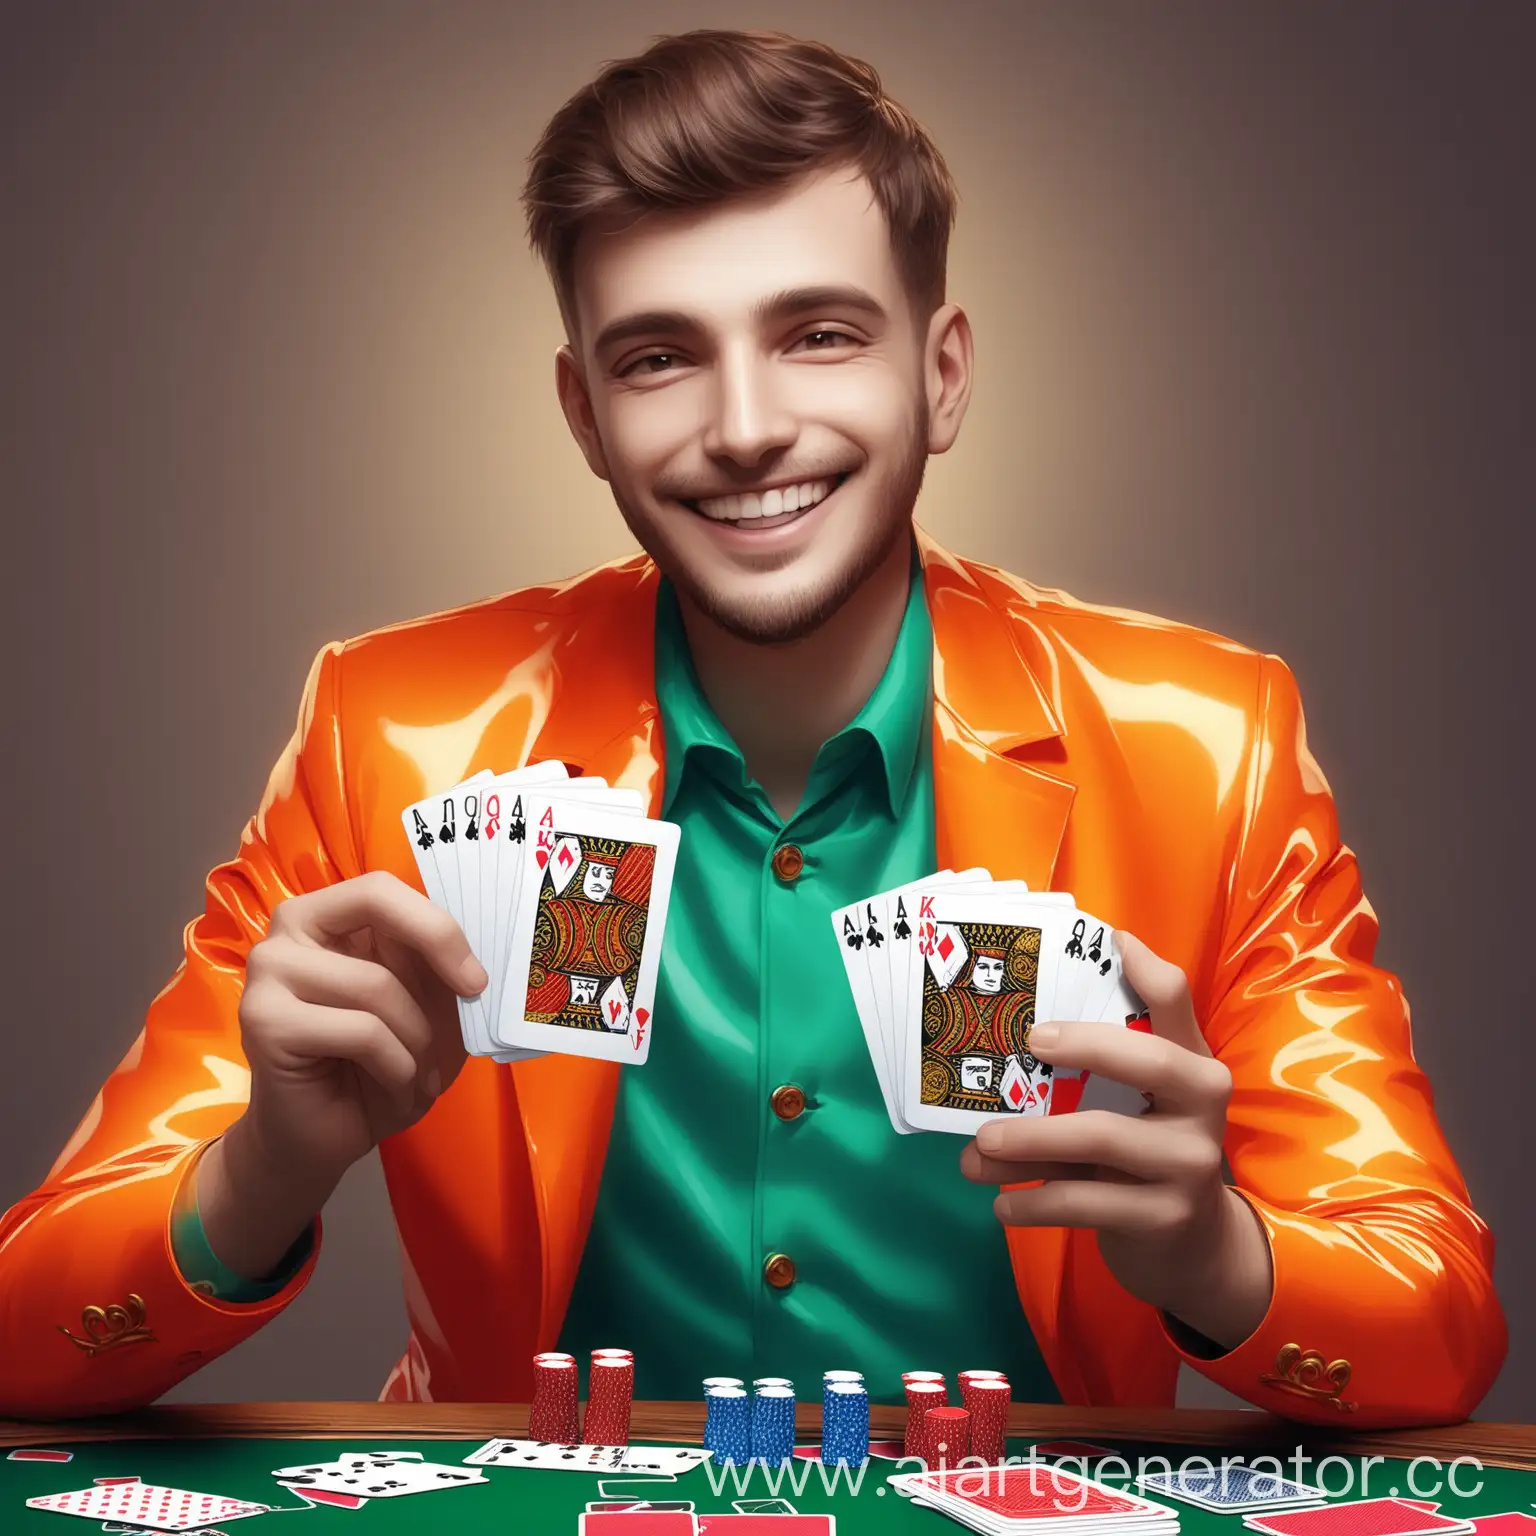 Smiling-Man-in-Bright-Clothing-Holding-Playing-Cards